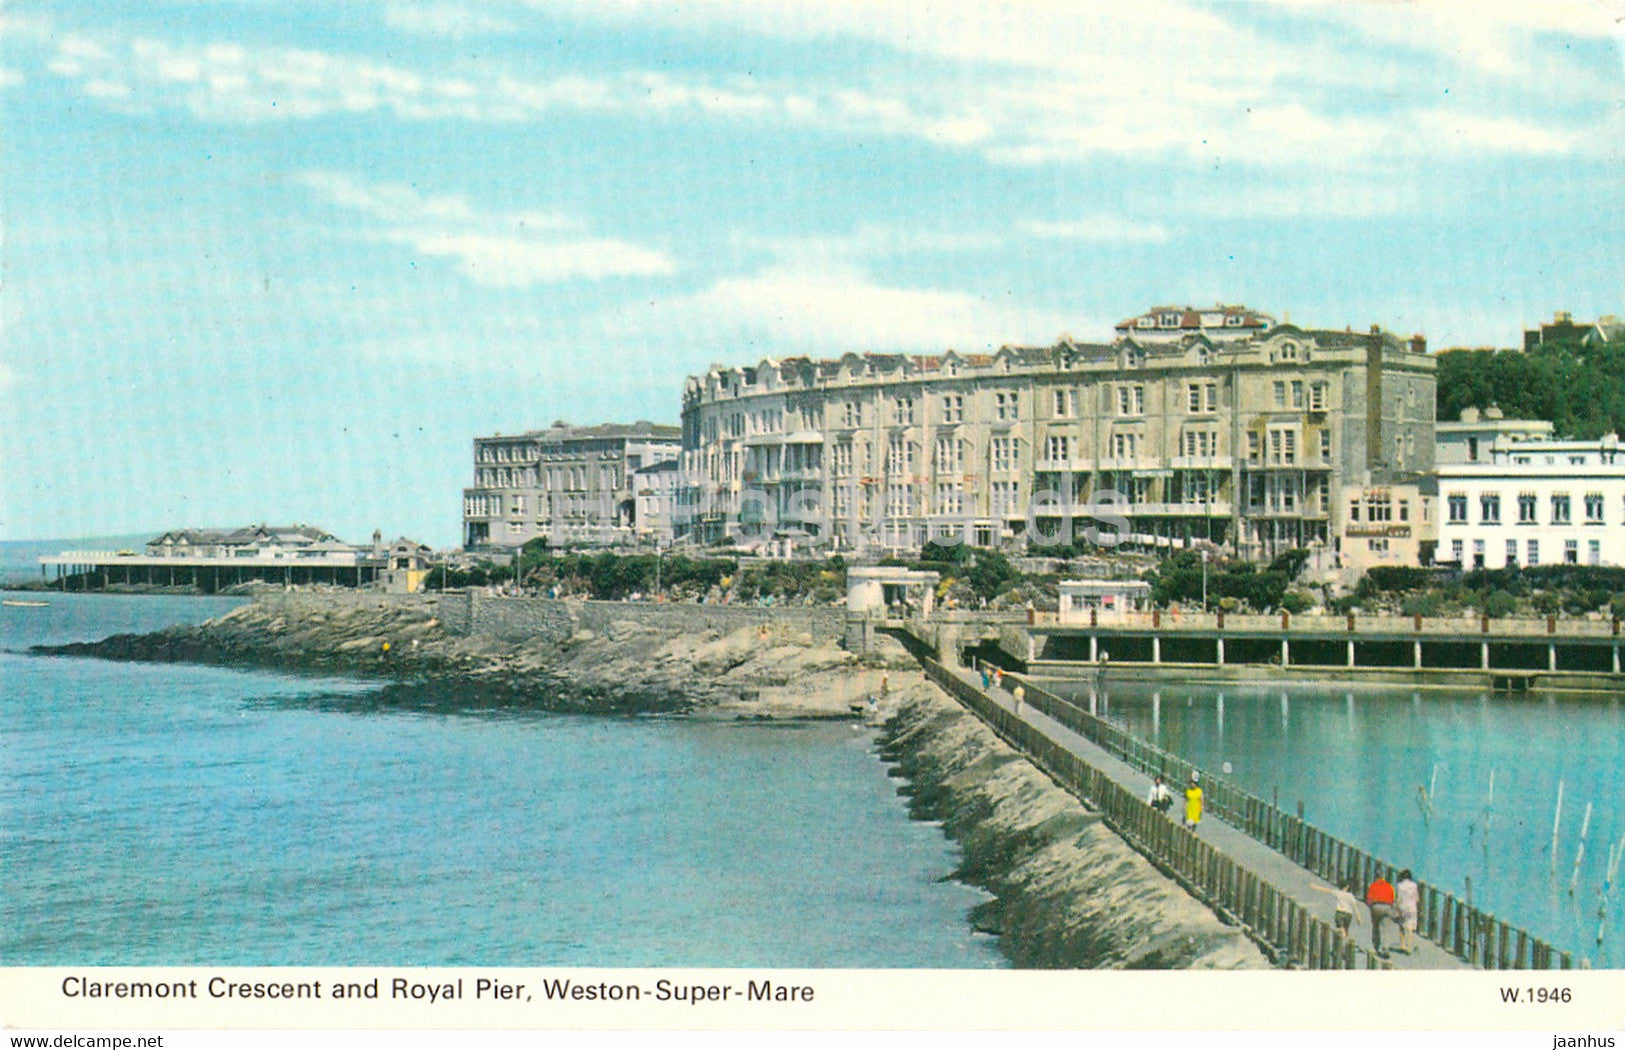 Claremont Crescent and Royal Pier - Weston Super Mare - 1977 - England - United Kingdom - used - JH Postcards